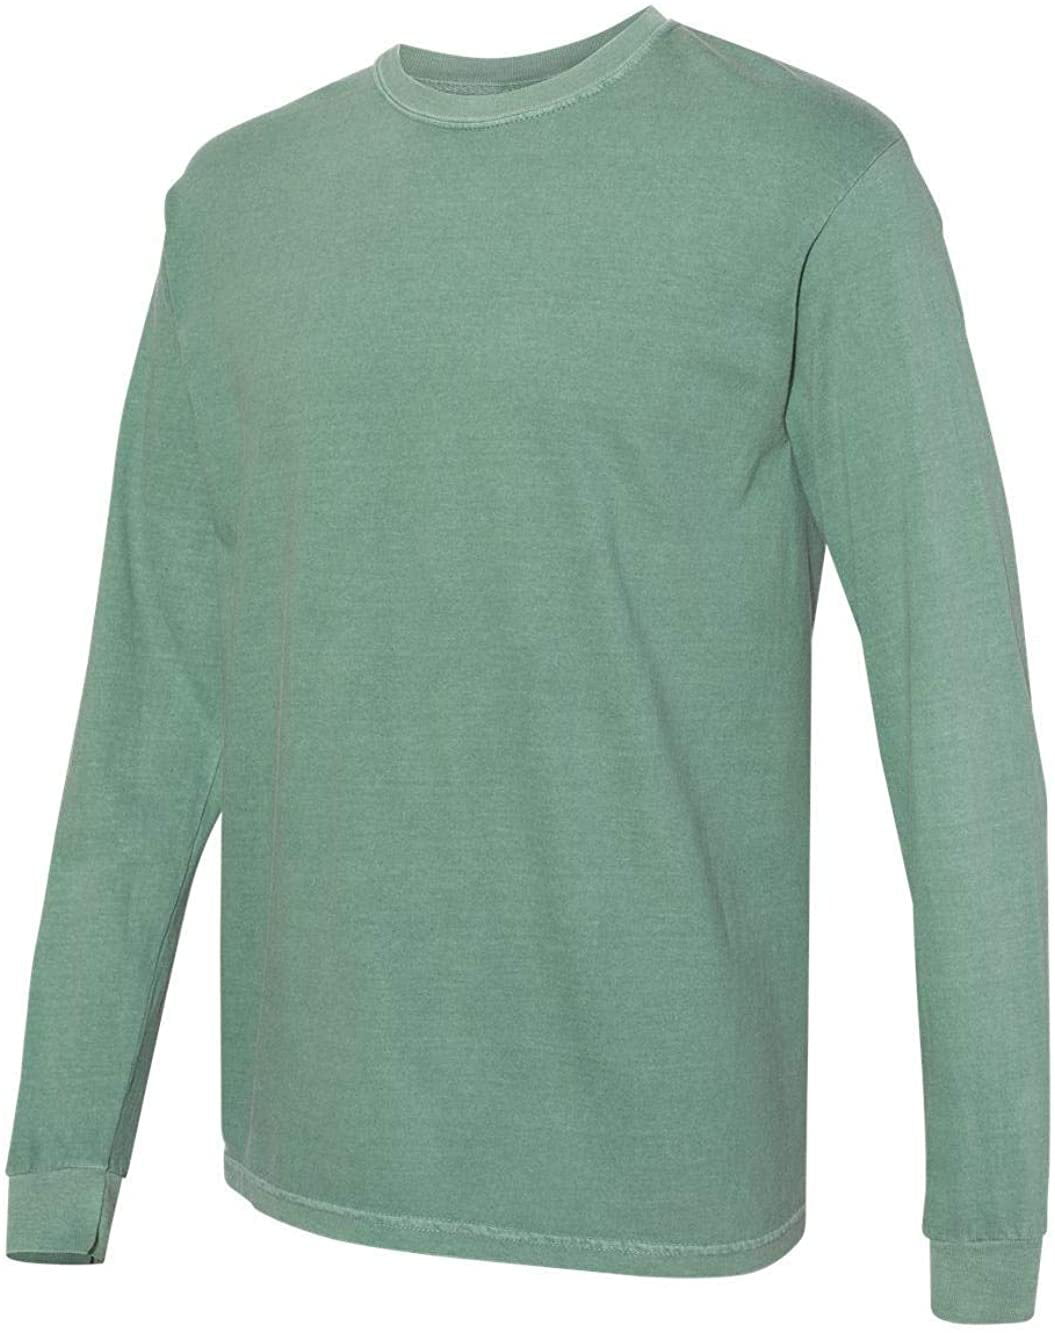 Style 6014 Comfort Colors Adult Long Sleeve Tee